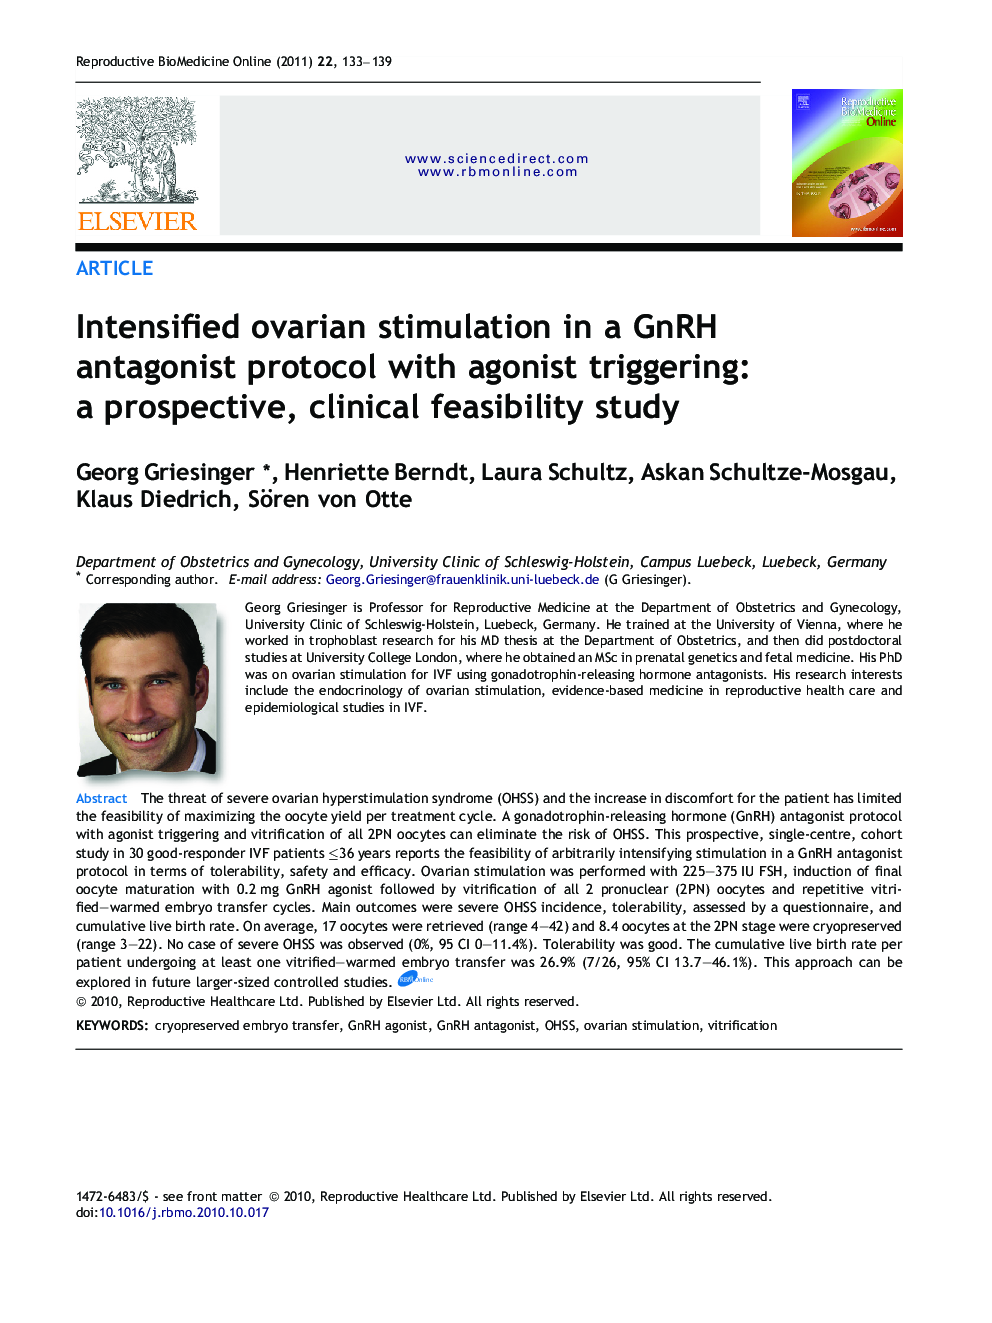 Intensified ovarian stimulation in a GnRH antagonist protocol with agonist triggering: a prospective, clinical feasibility study